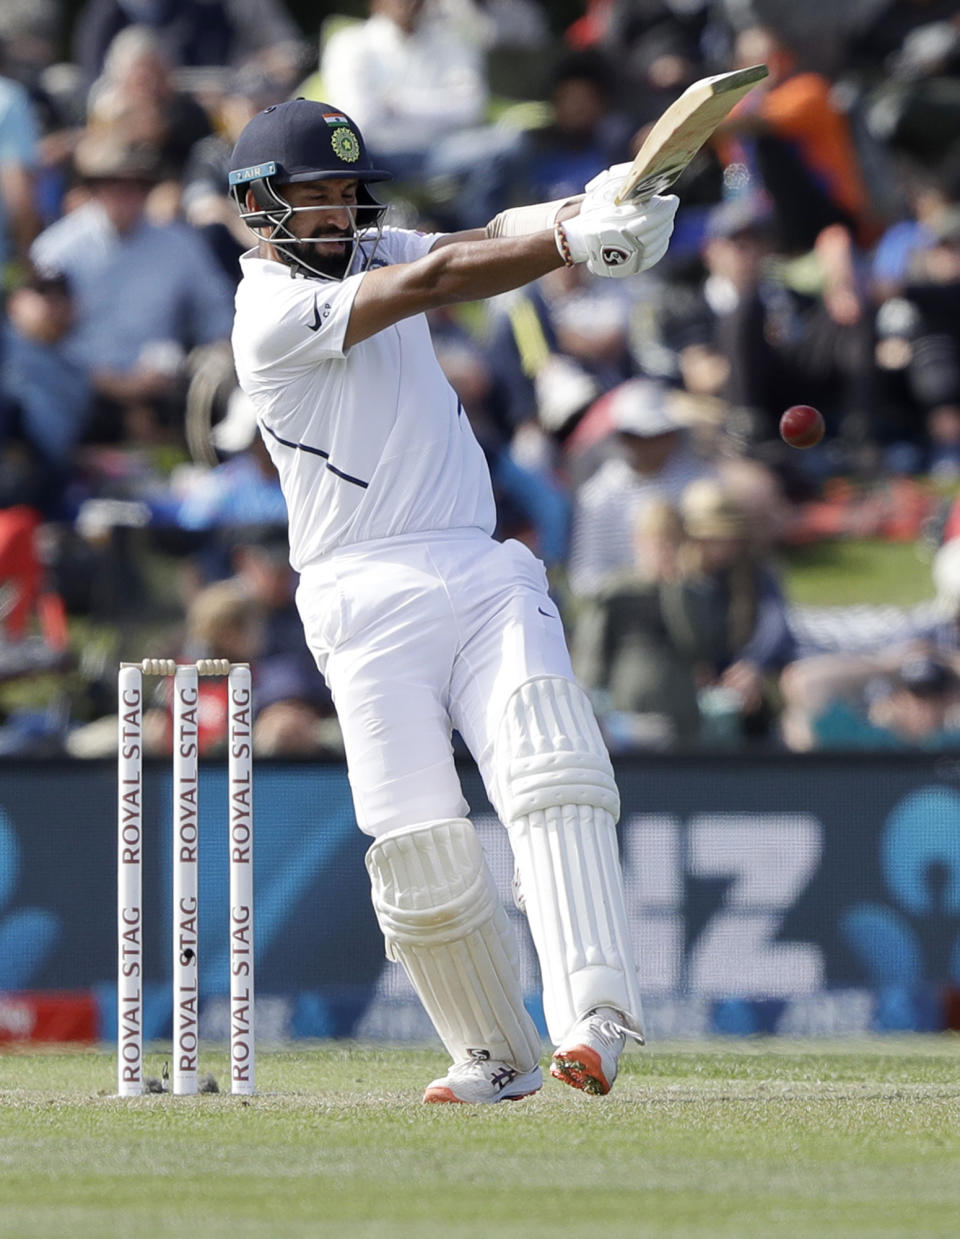 India's Cheteshwar Pujara bats during play on day one of the second cricket test between New Zealand and India at Hagley Oval in Christchurch, New Zealand, Saturday, Feb. 29, 2020. (AP Photo/Mark Baker)